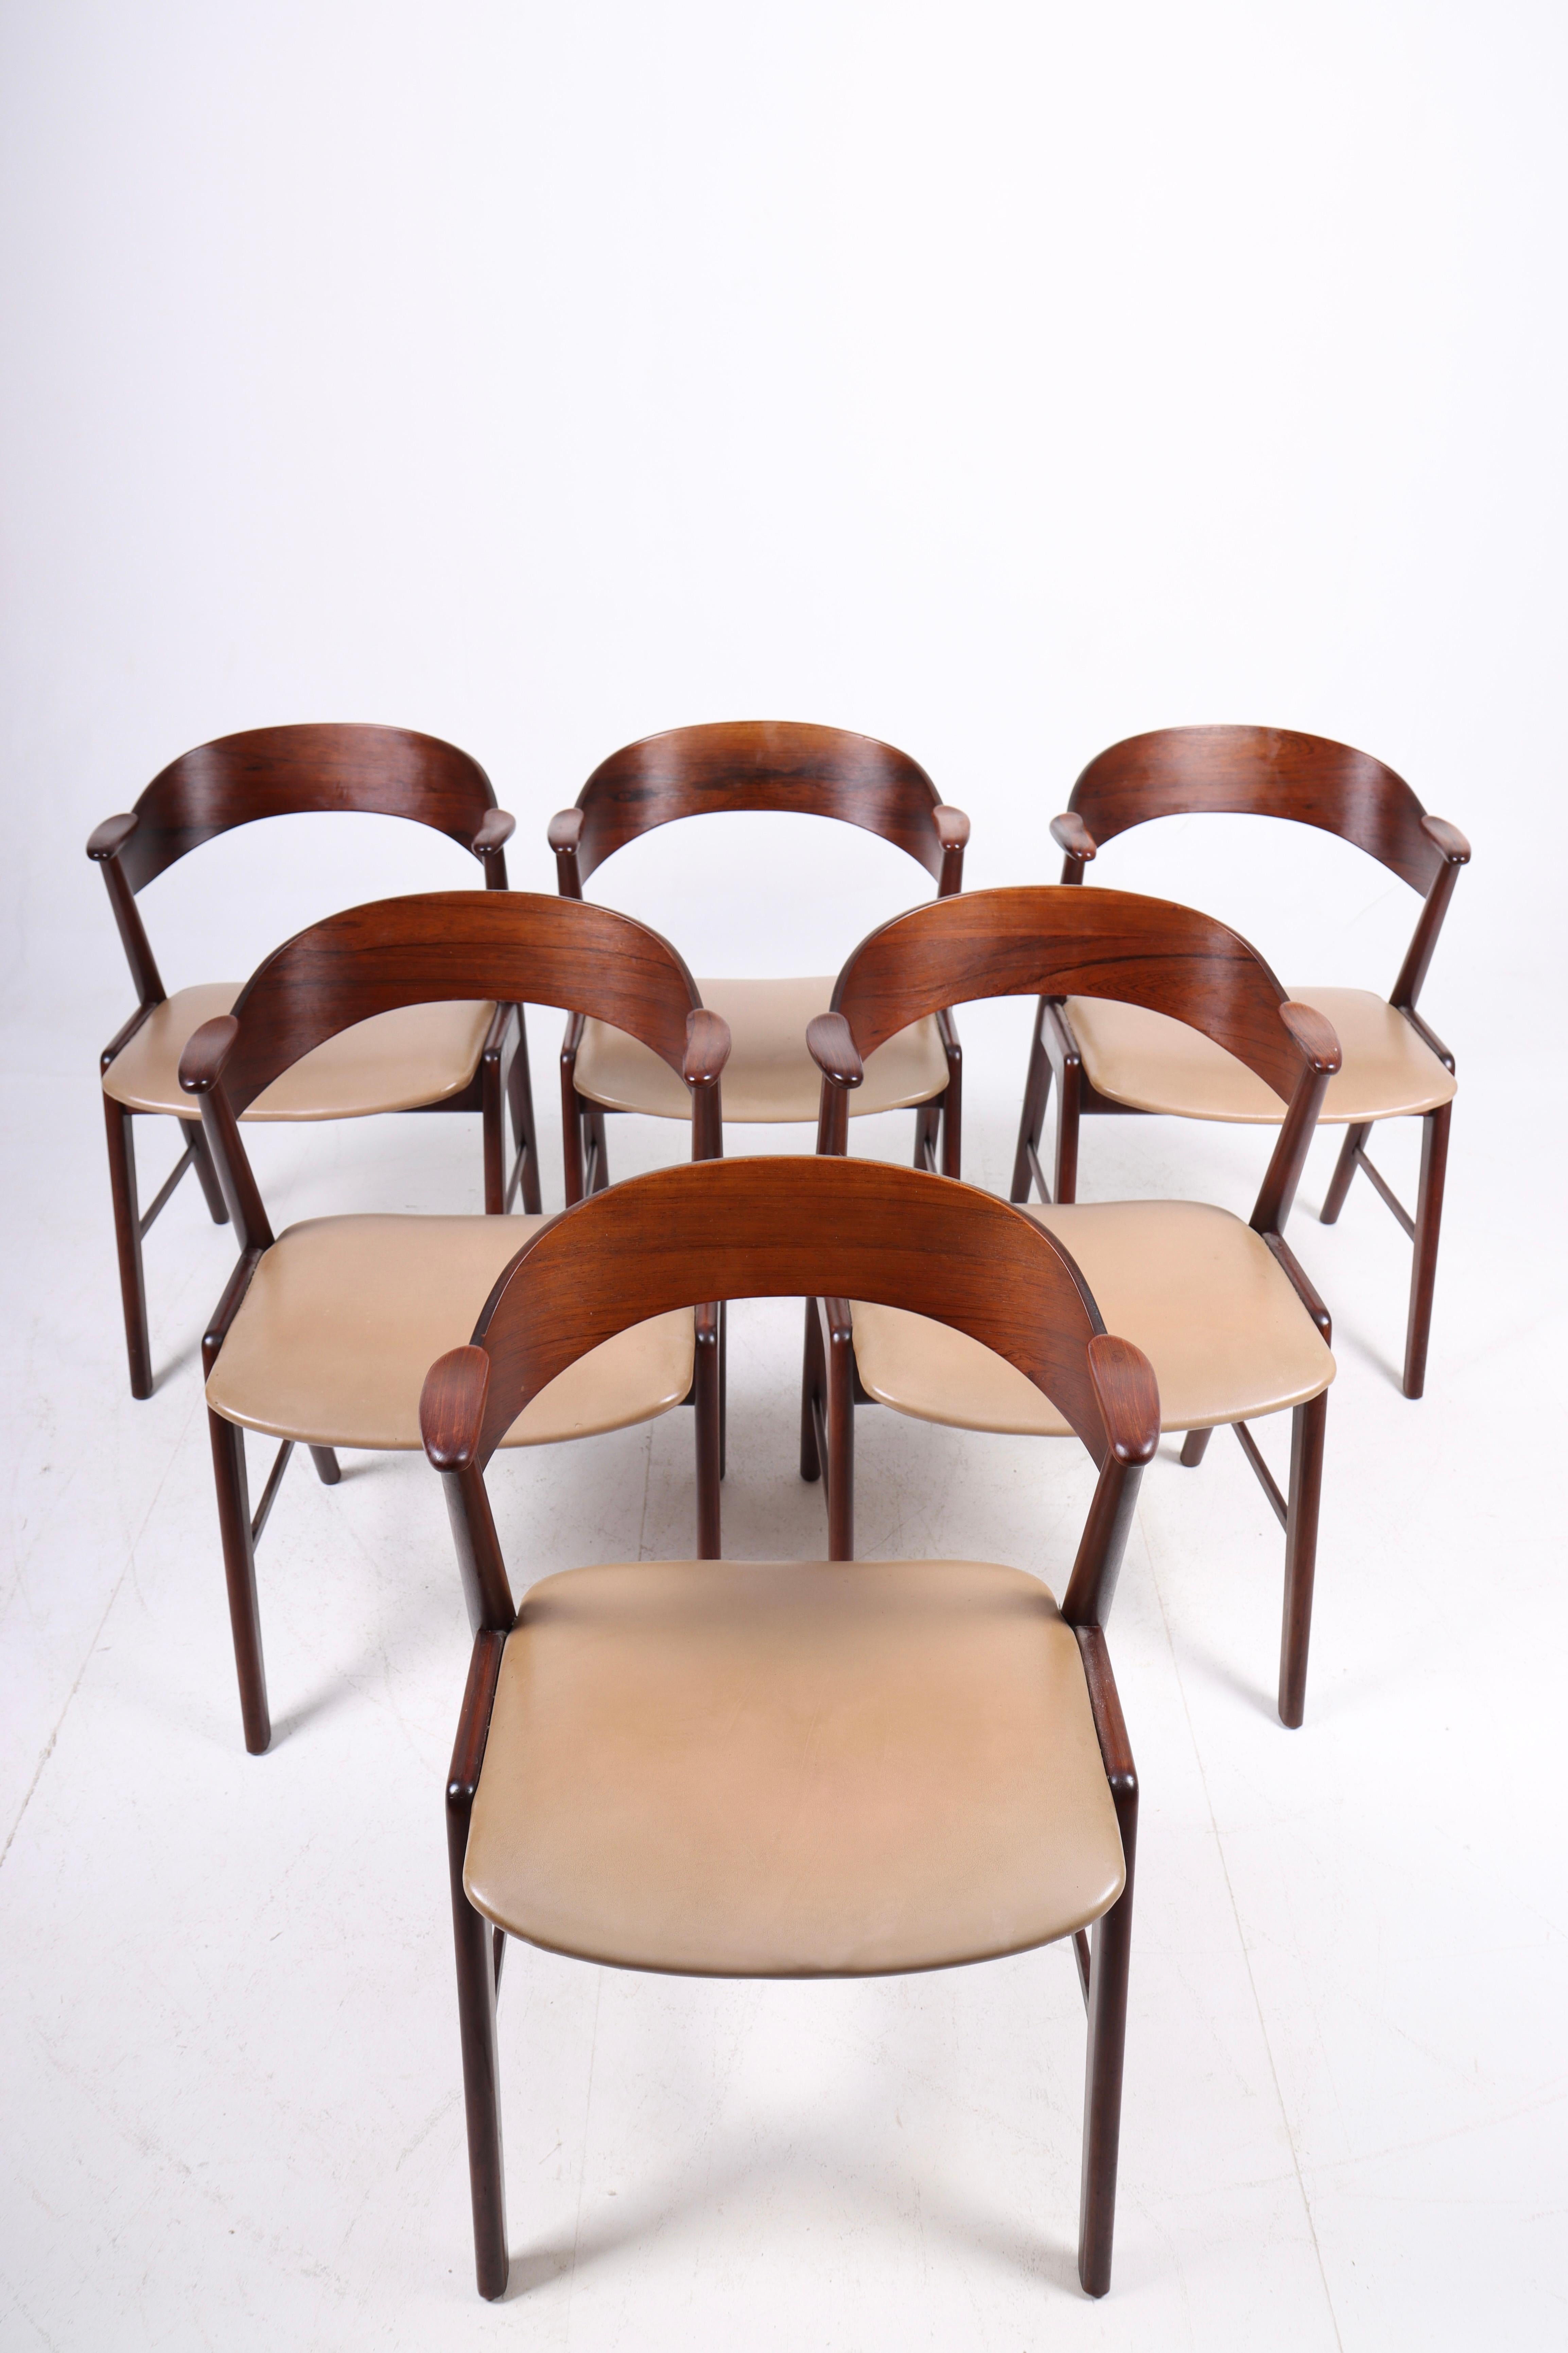 Leather Set of Eight Midcentury Dining Chairs in Rosewood, Danish Design, 1960s